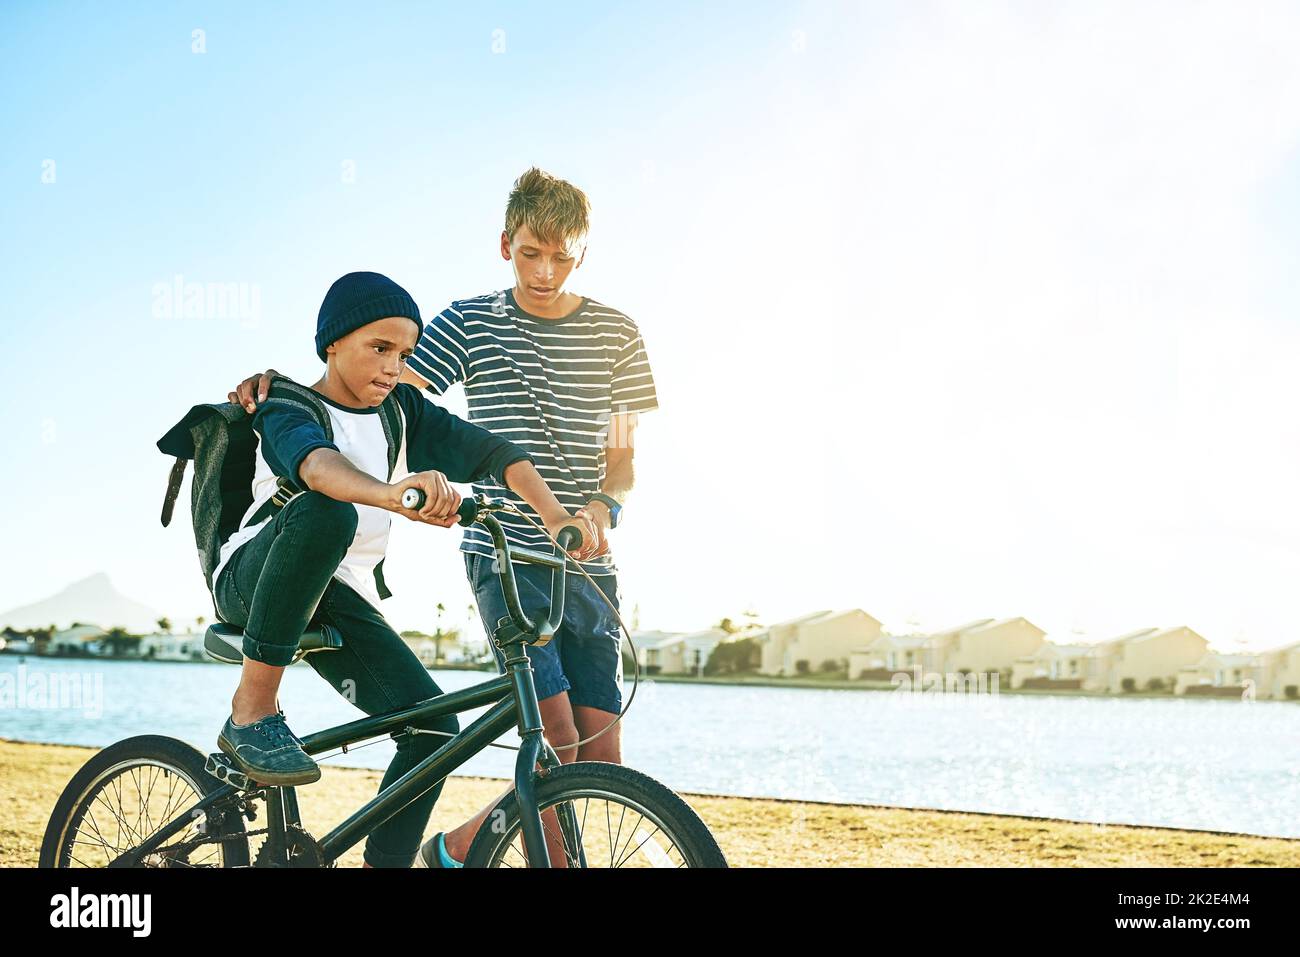 Teaching his brother how to ride a bike. Cropped shot of a young boy teaching his younger brother how to ride a bike alongside a lagoon. Stock Photo